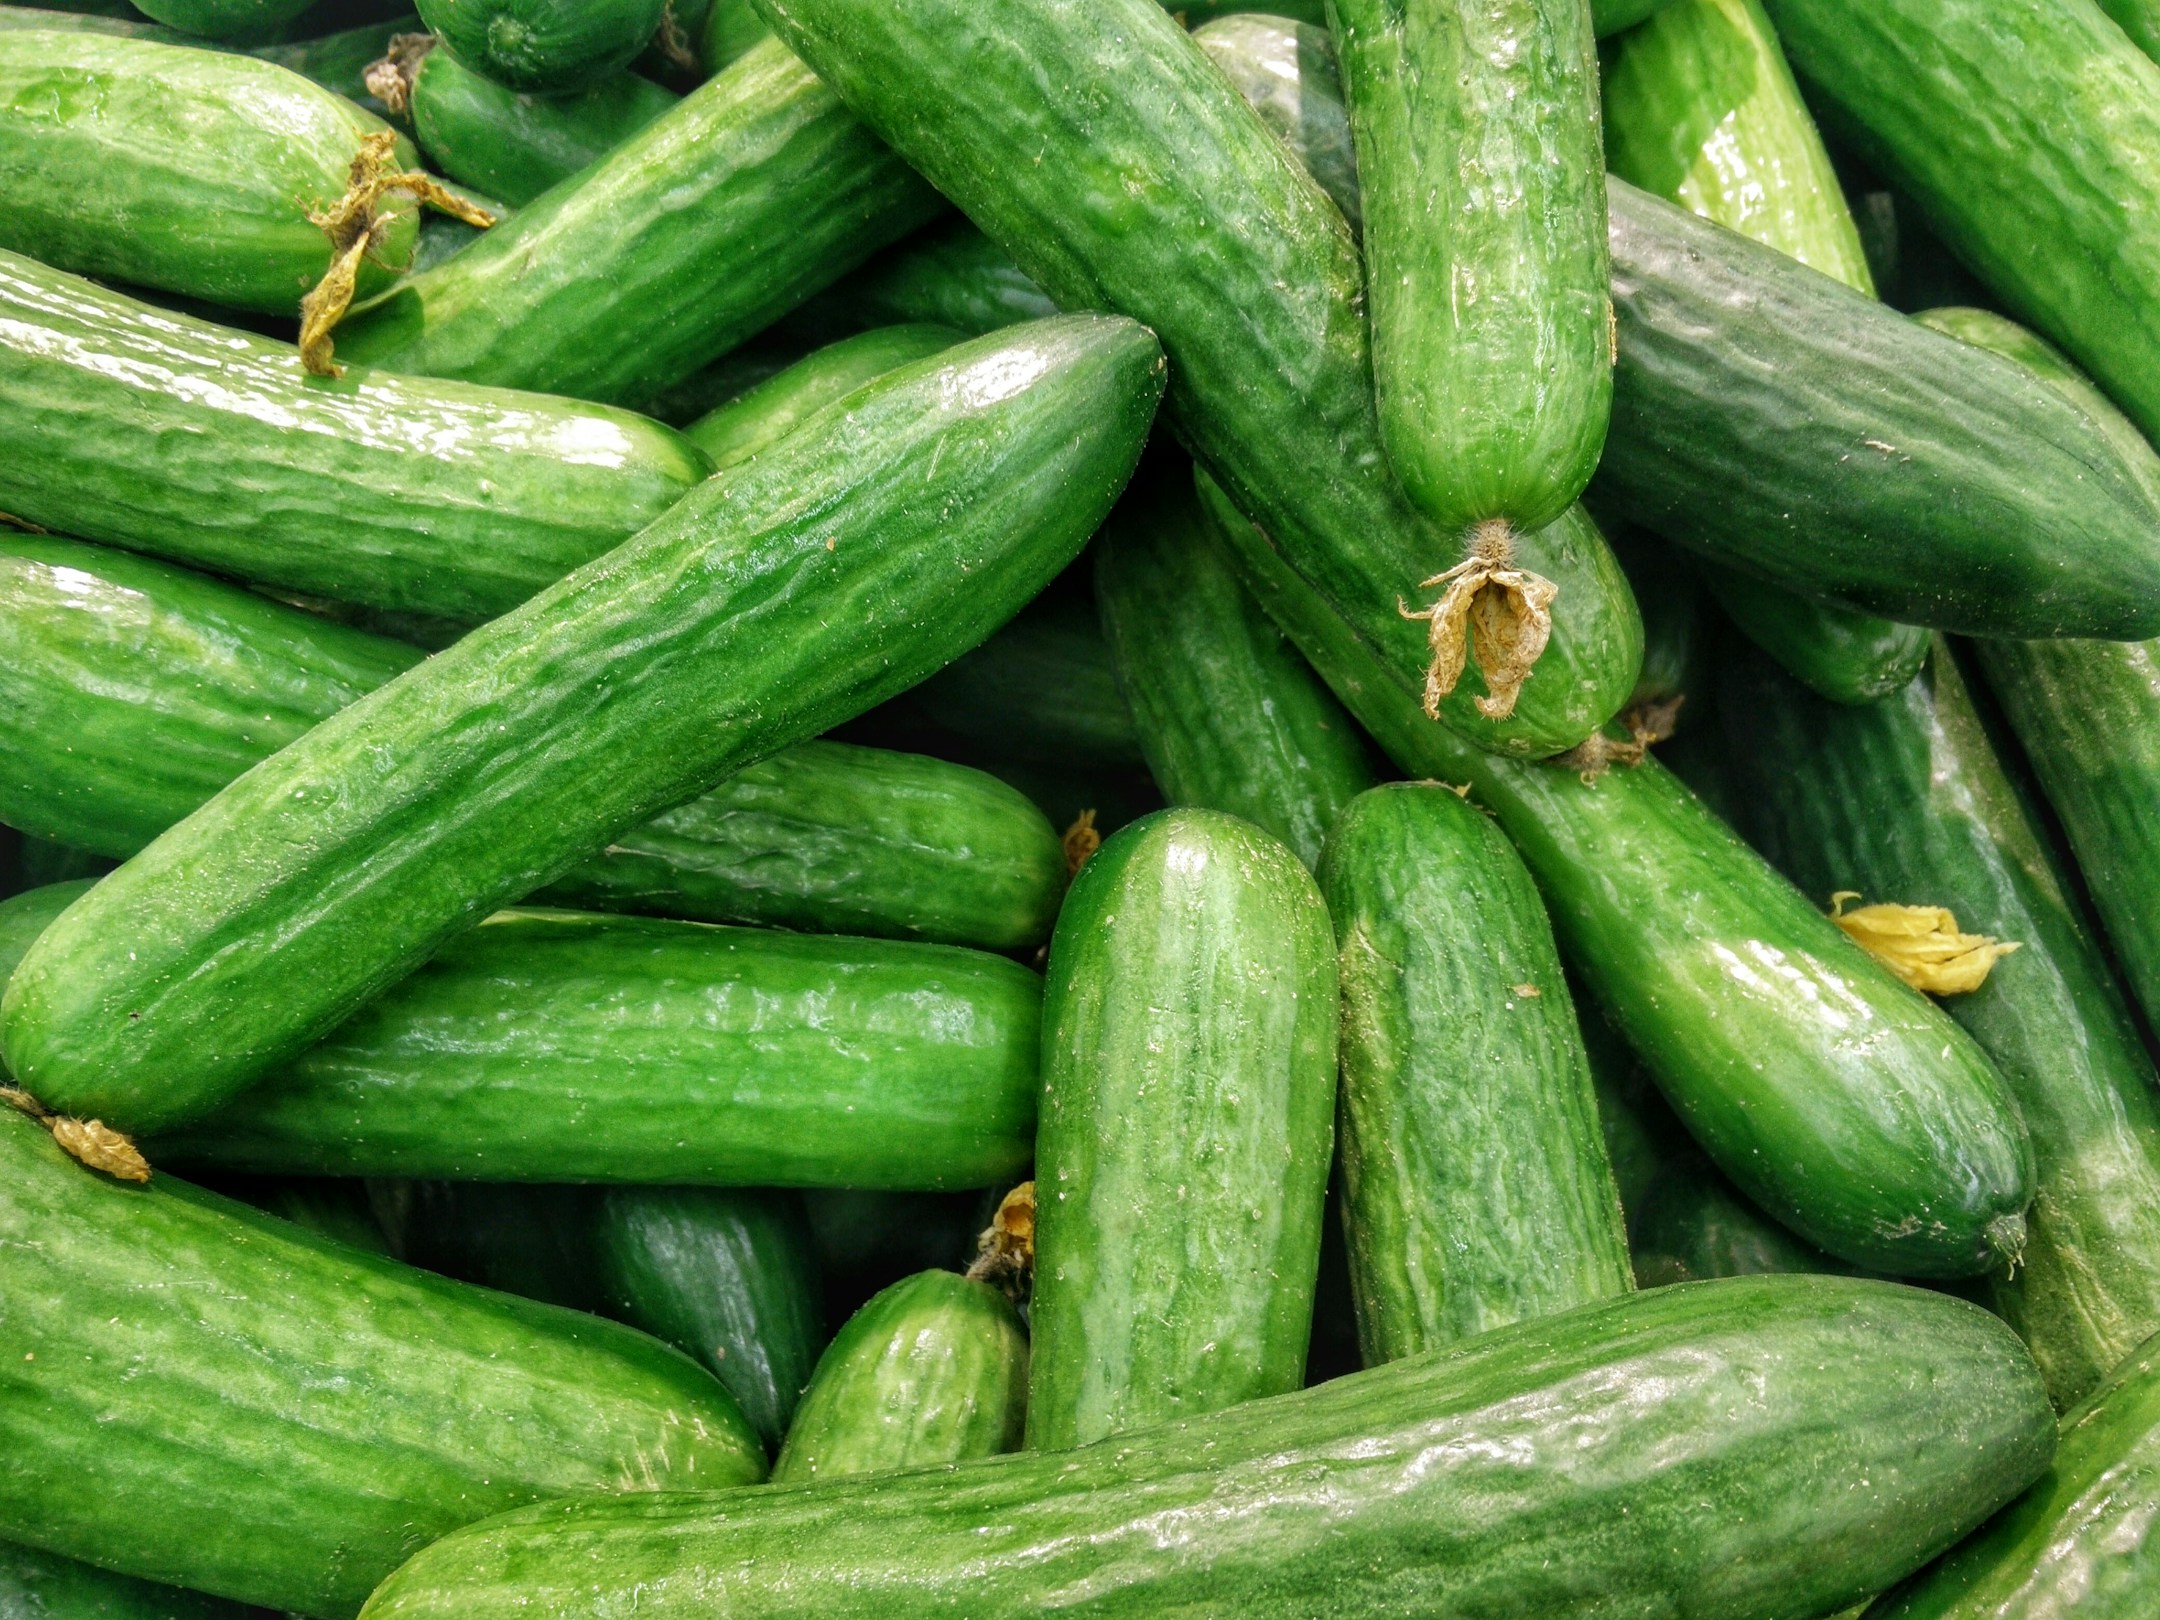 https://hindi.krishijagran.com/ampstories/cucumber-side-effects-these-people-should-not-eat-cucumber-in-night.html